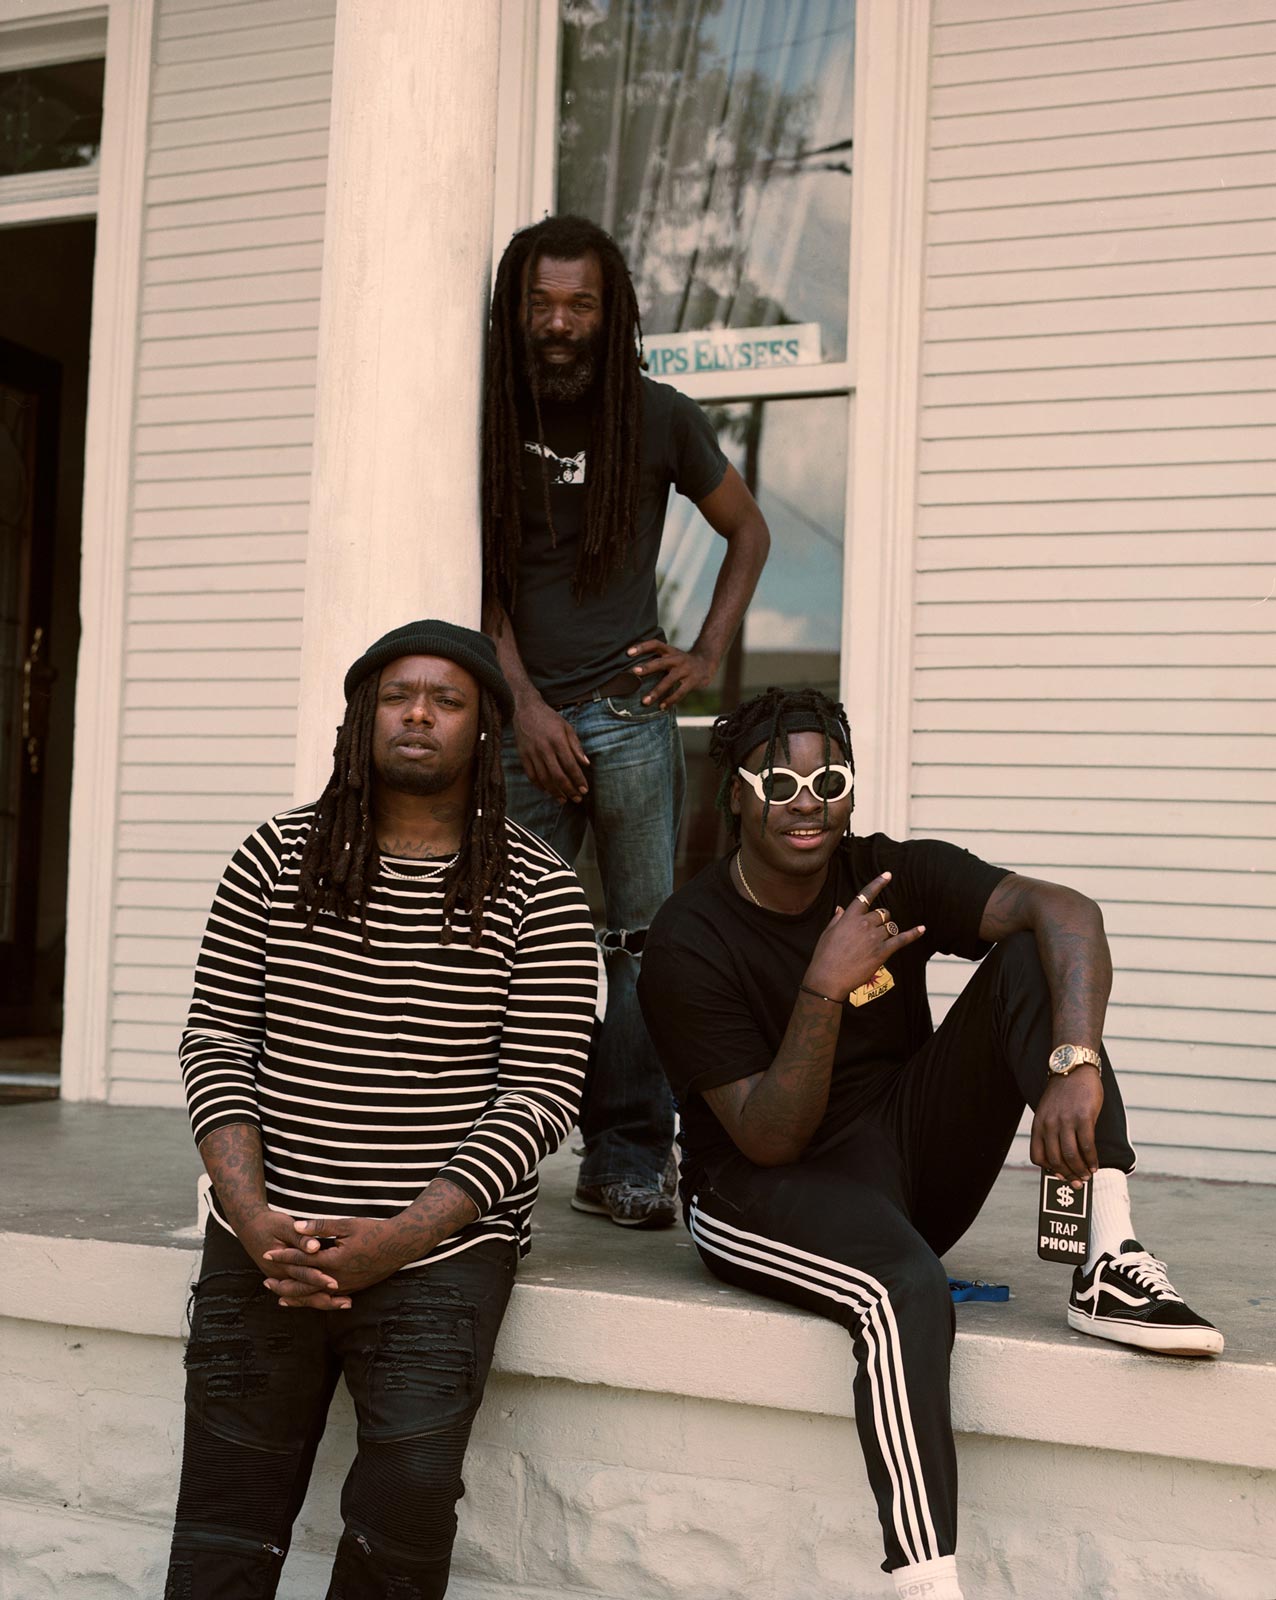 Nyko Bandz hanging out on front porch, New Orleans.